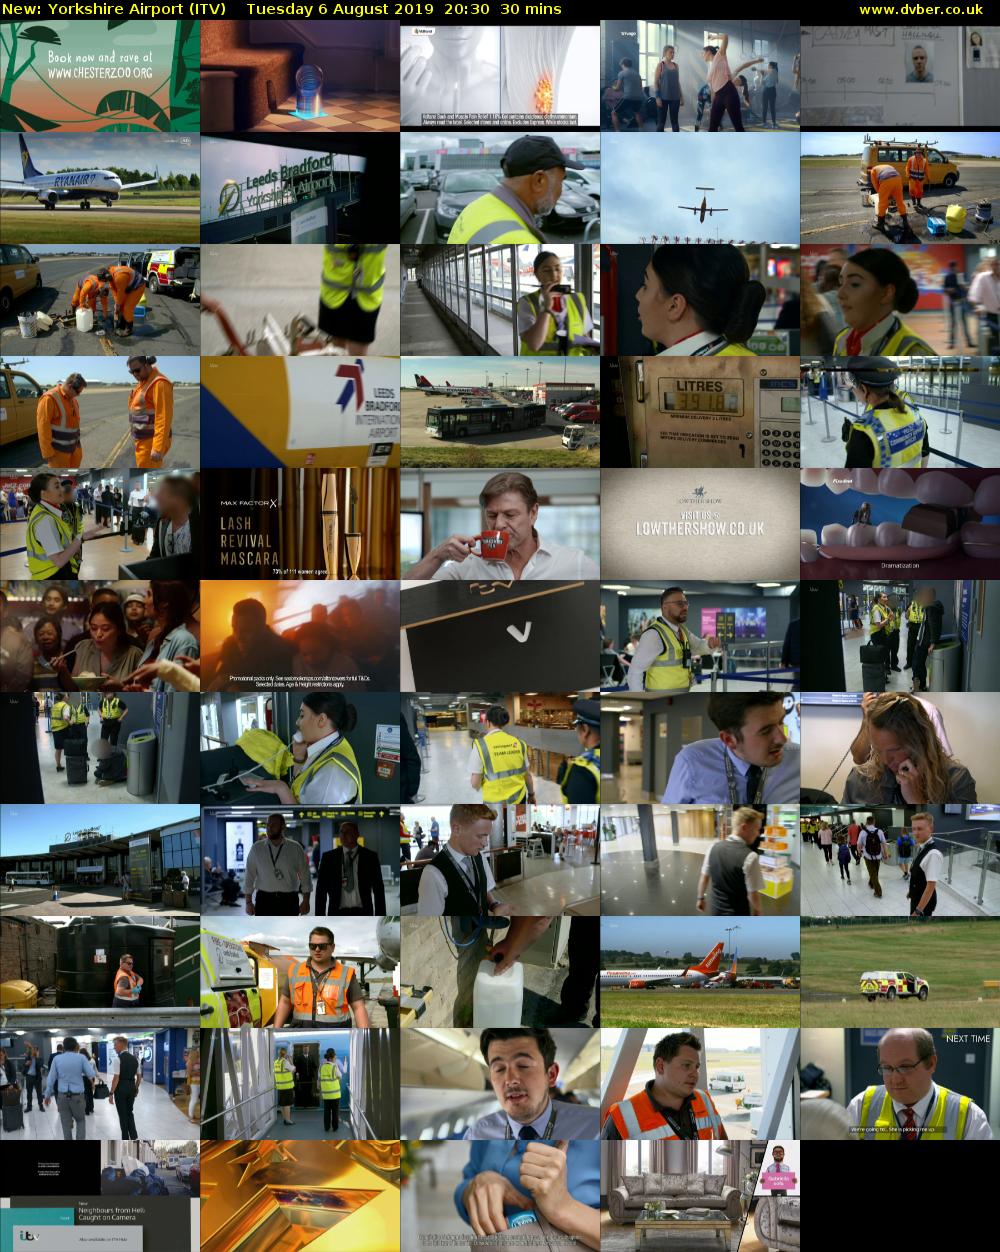 Yorkshire Airport (ITV) Tuesday 6 August 2019 20:30 - 21:00